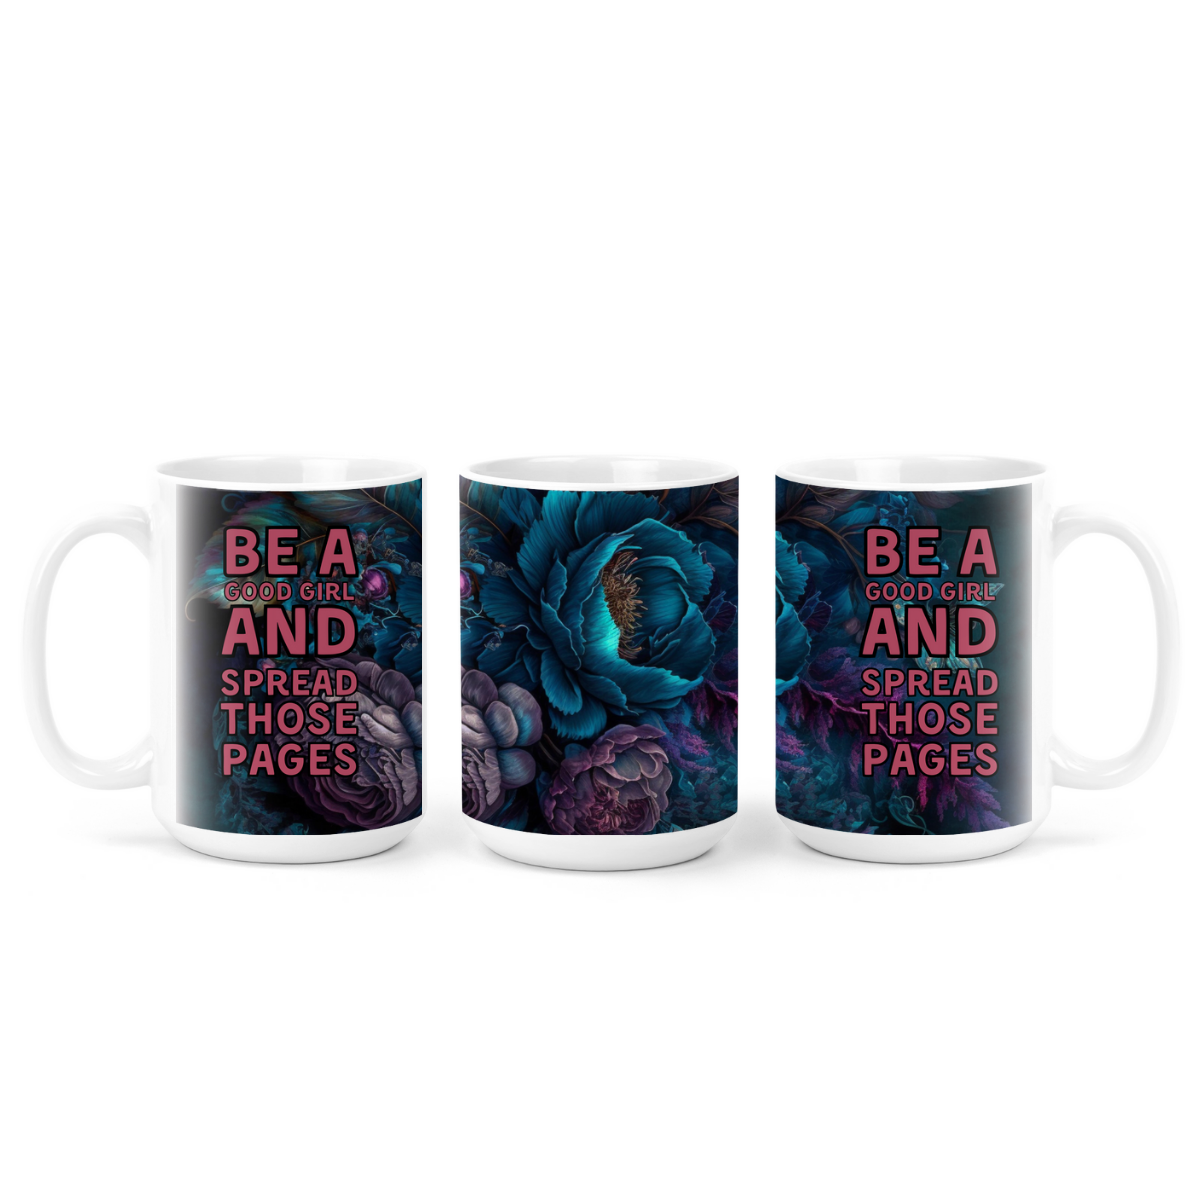 Be A Good Girl And Spread Those Pages | Mug - The Pretty Things.ca